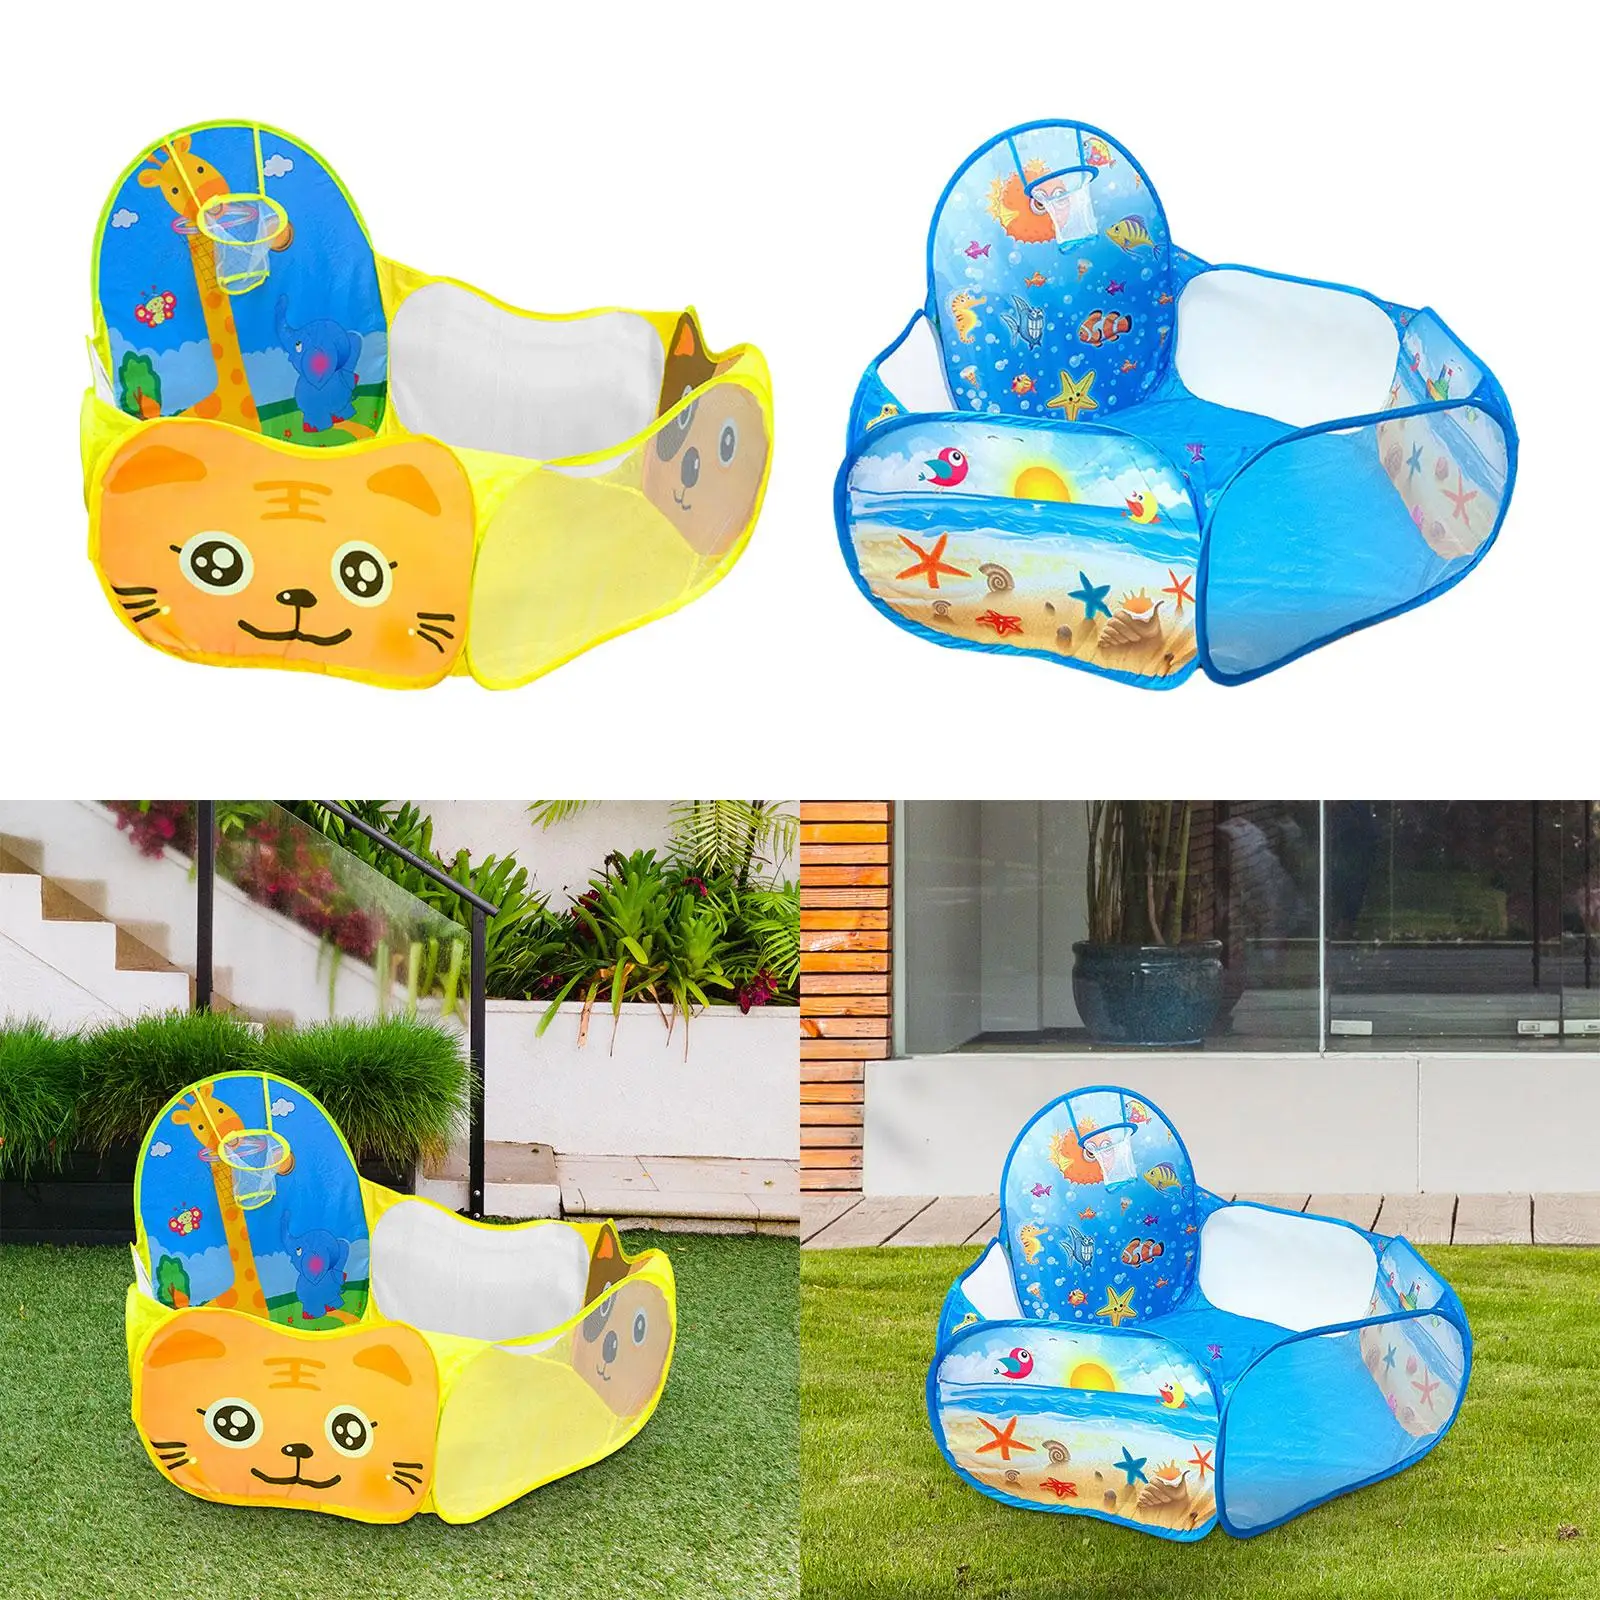 Childrens Ball Play Tent Child Room Decoration Playpen Ball Pool Foldable Tent for Boy Girls Kids Children Toddlers